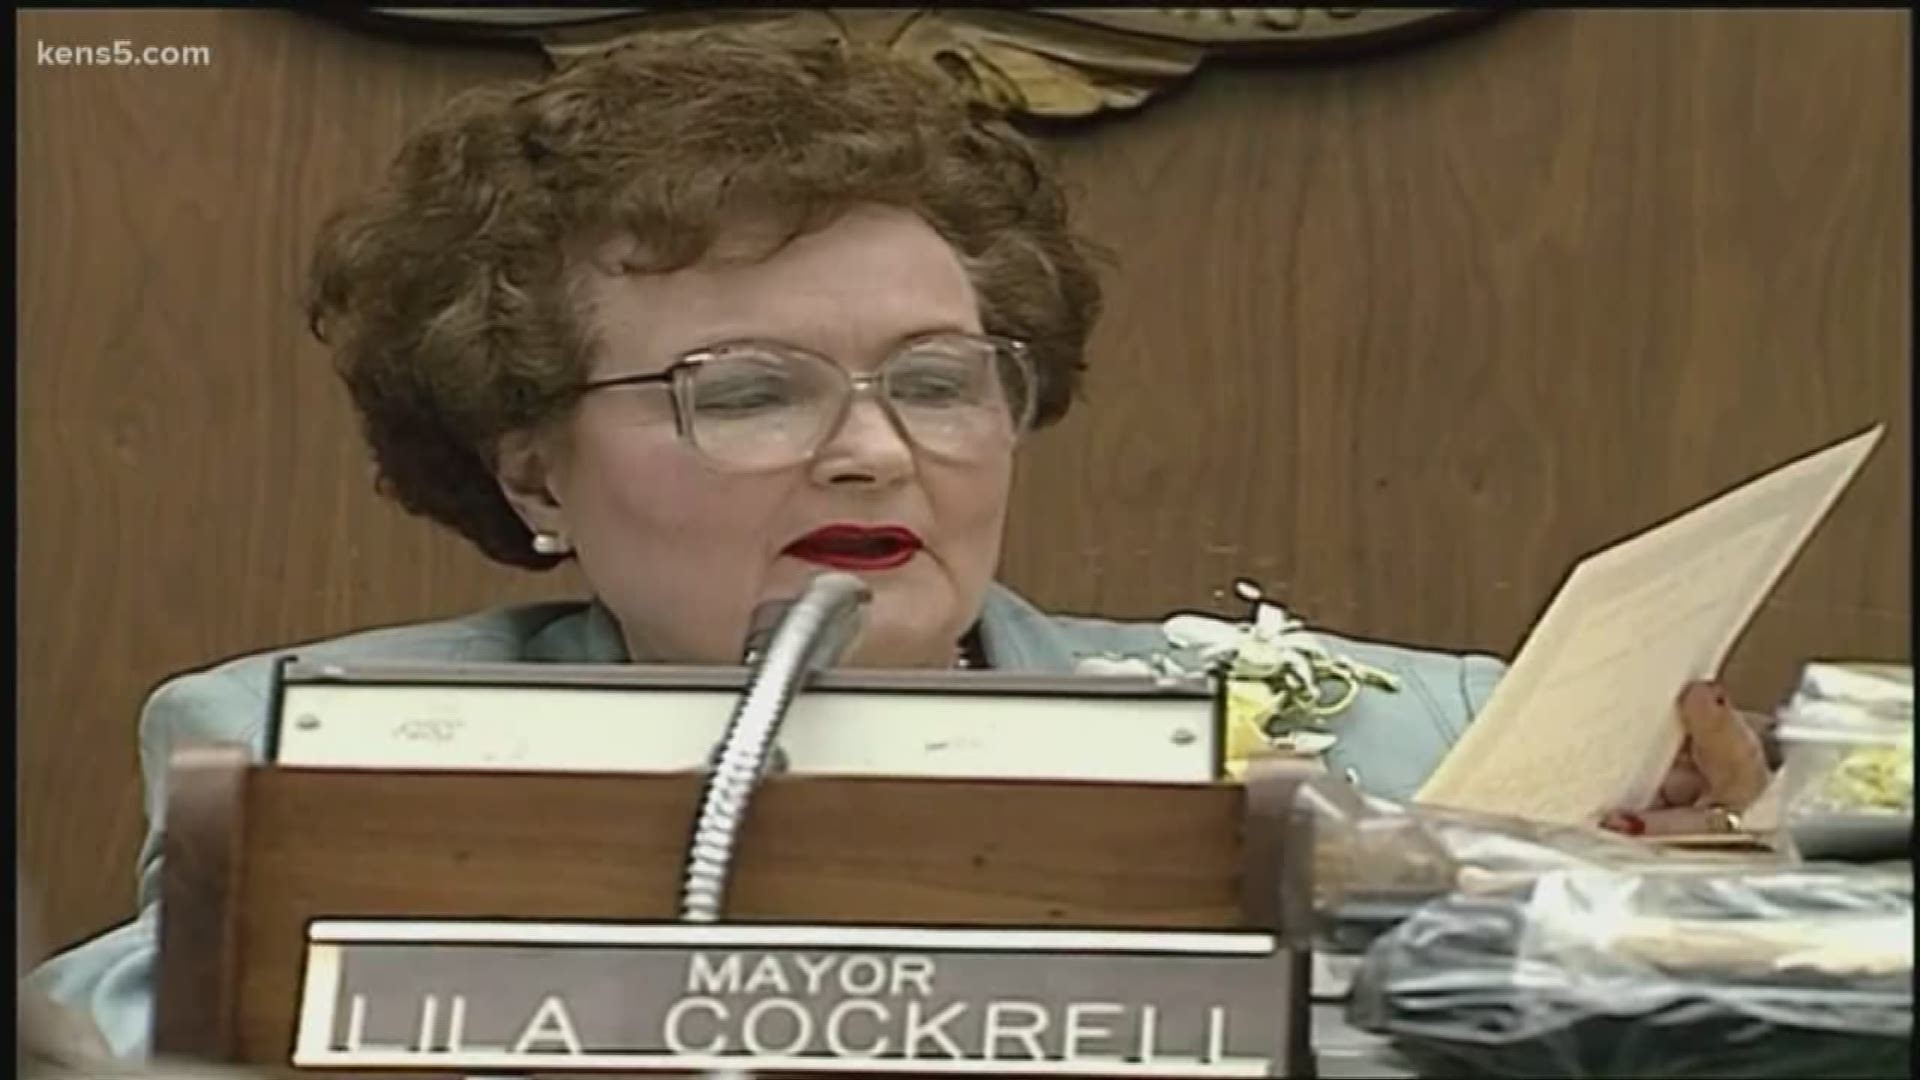 Cockrell, the first female mayor of San Antonio, passed away this week at 97.